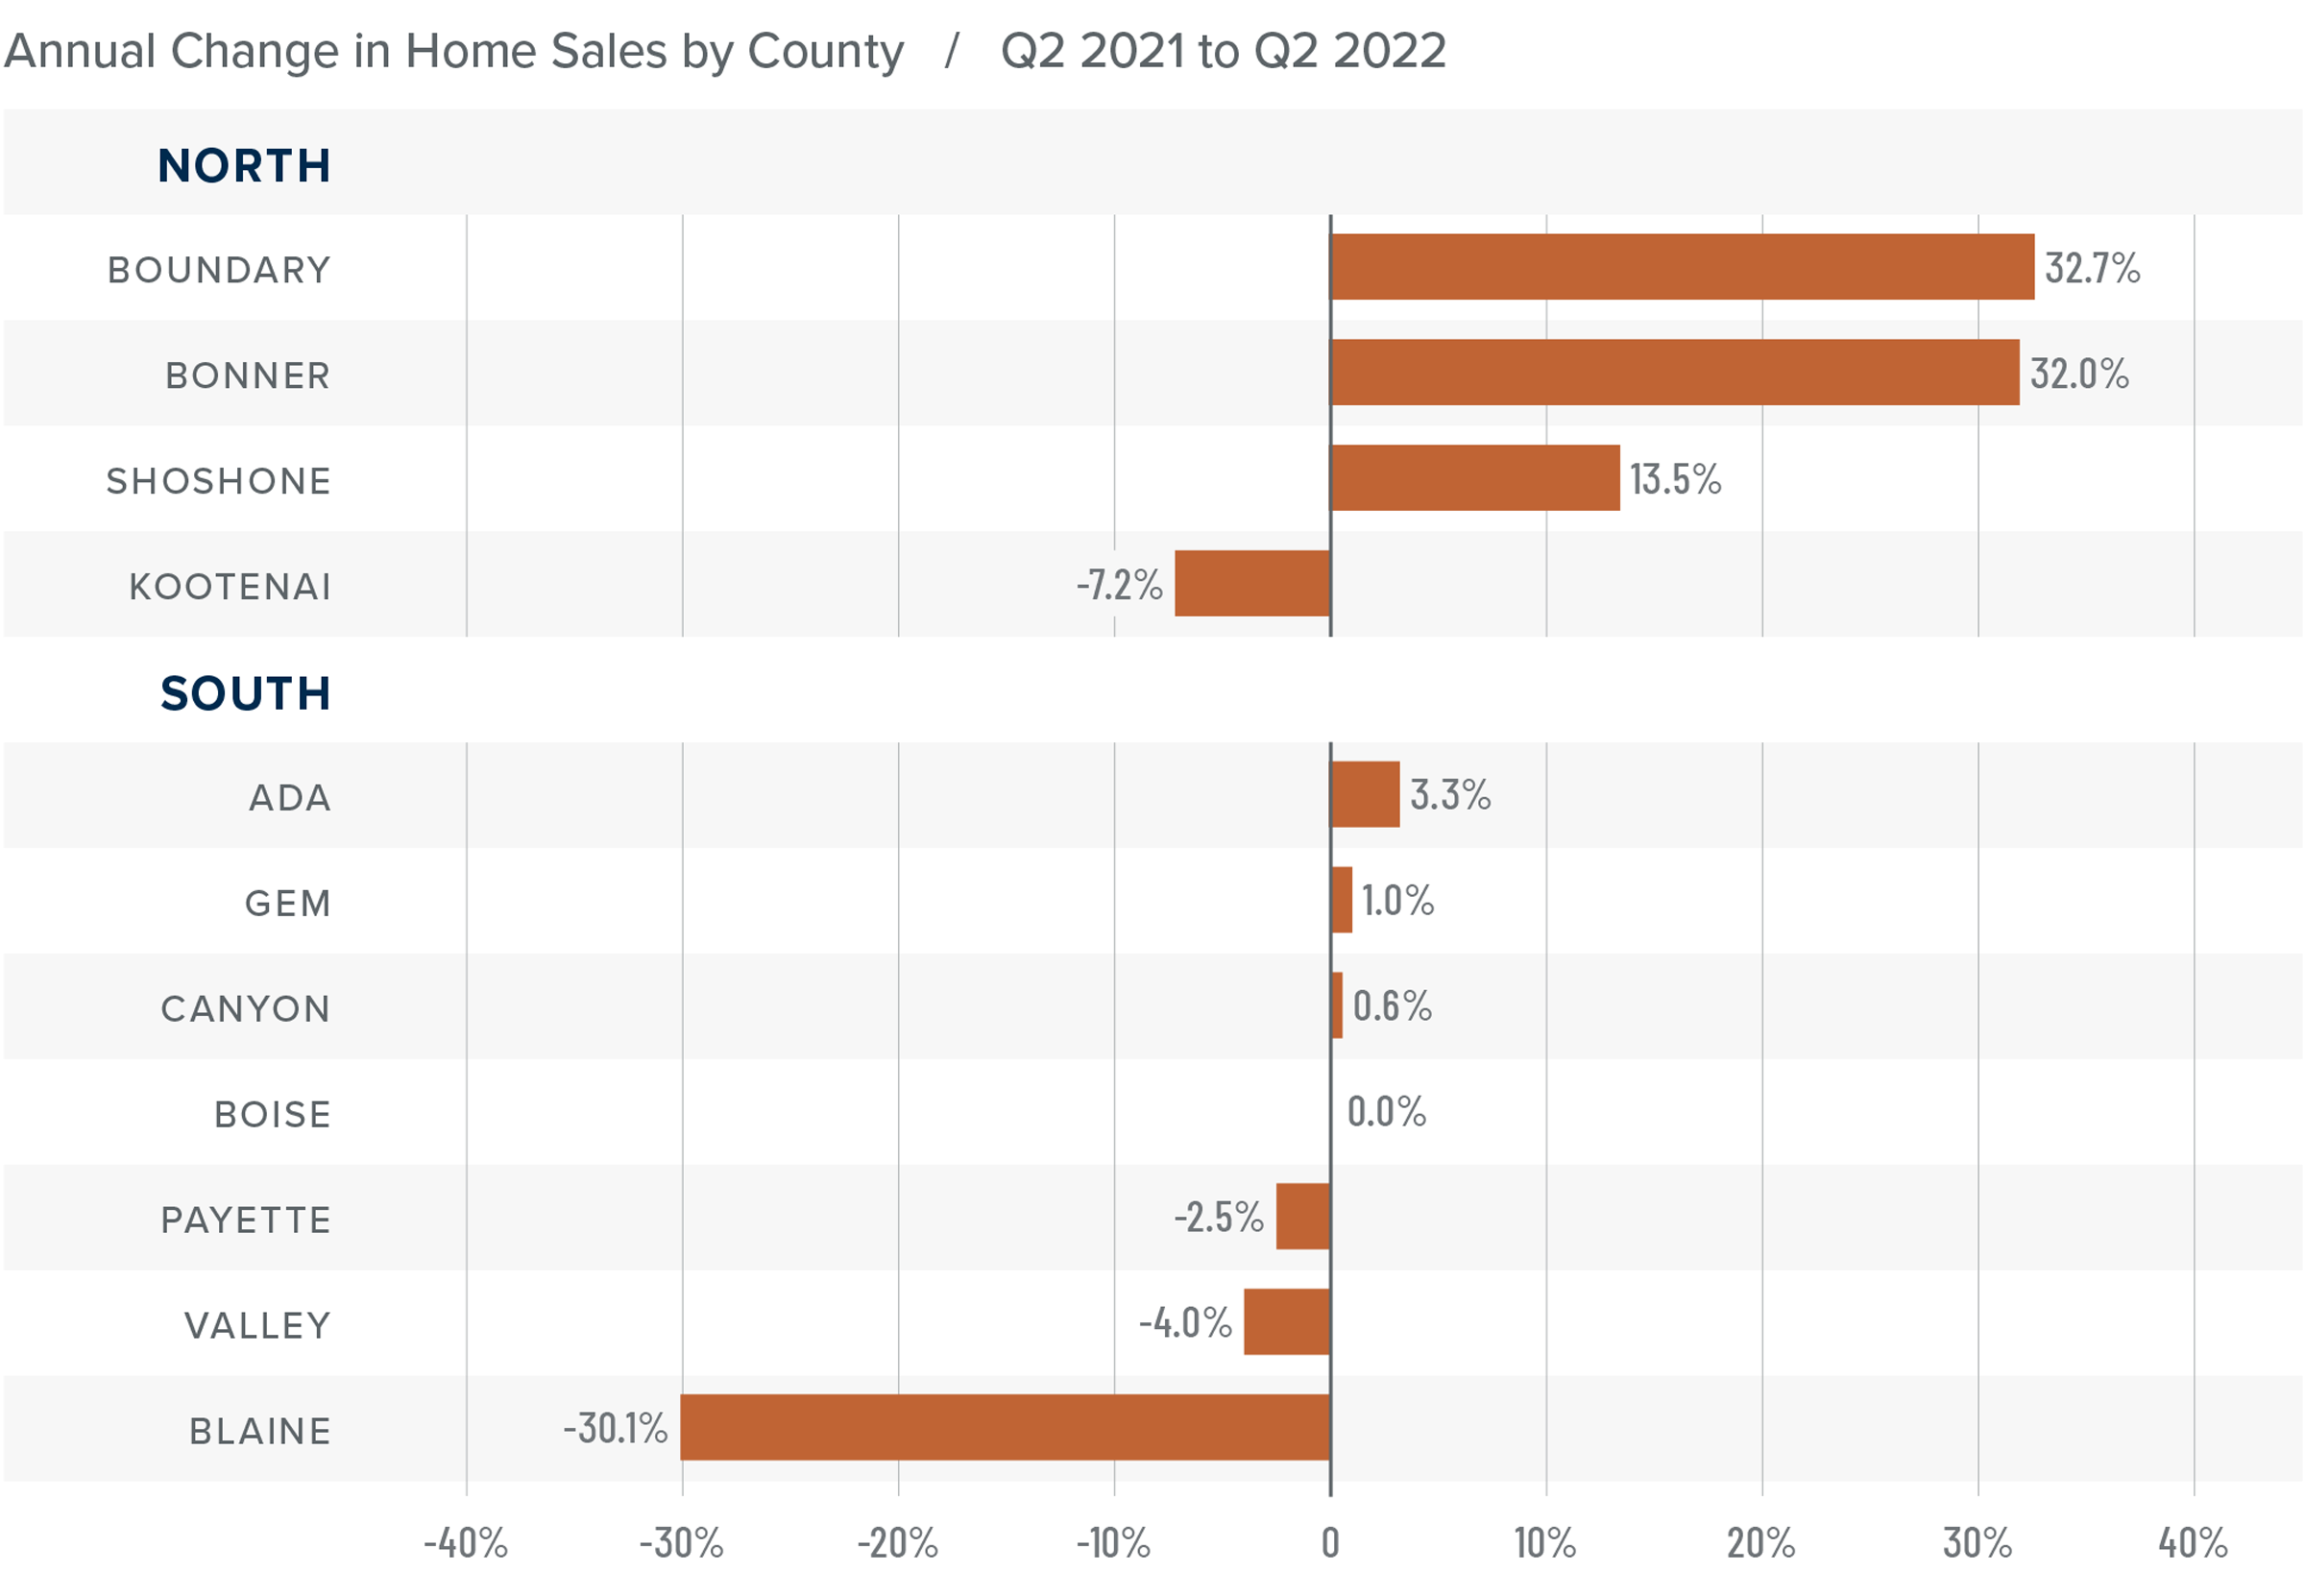 A bar graph showing the annual change in home sales for various counties in North and South Idaho from Q2 2021 to Q2 2022. In North Idaho, Boundary County came out on top with a 32.7% change, followed by Bonner at 32%, Shoshone at 13.5%, and Kootenai at -7.2%. In South Idaho, Ada County had a 3.3% change, followed by Gem at 1%, Canyon at 0.6%, Boise at 0%, Payette at -2.5%, Valley at -4%, and Blaine County at -30.1%.